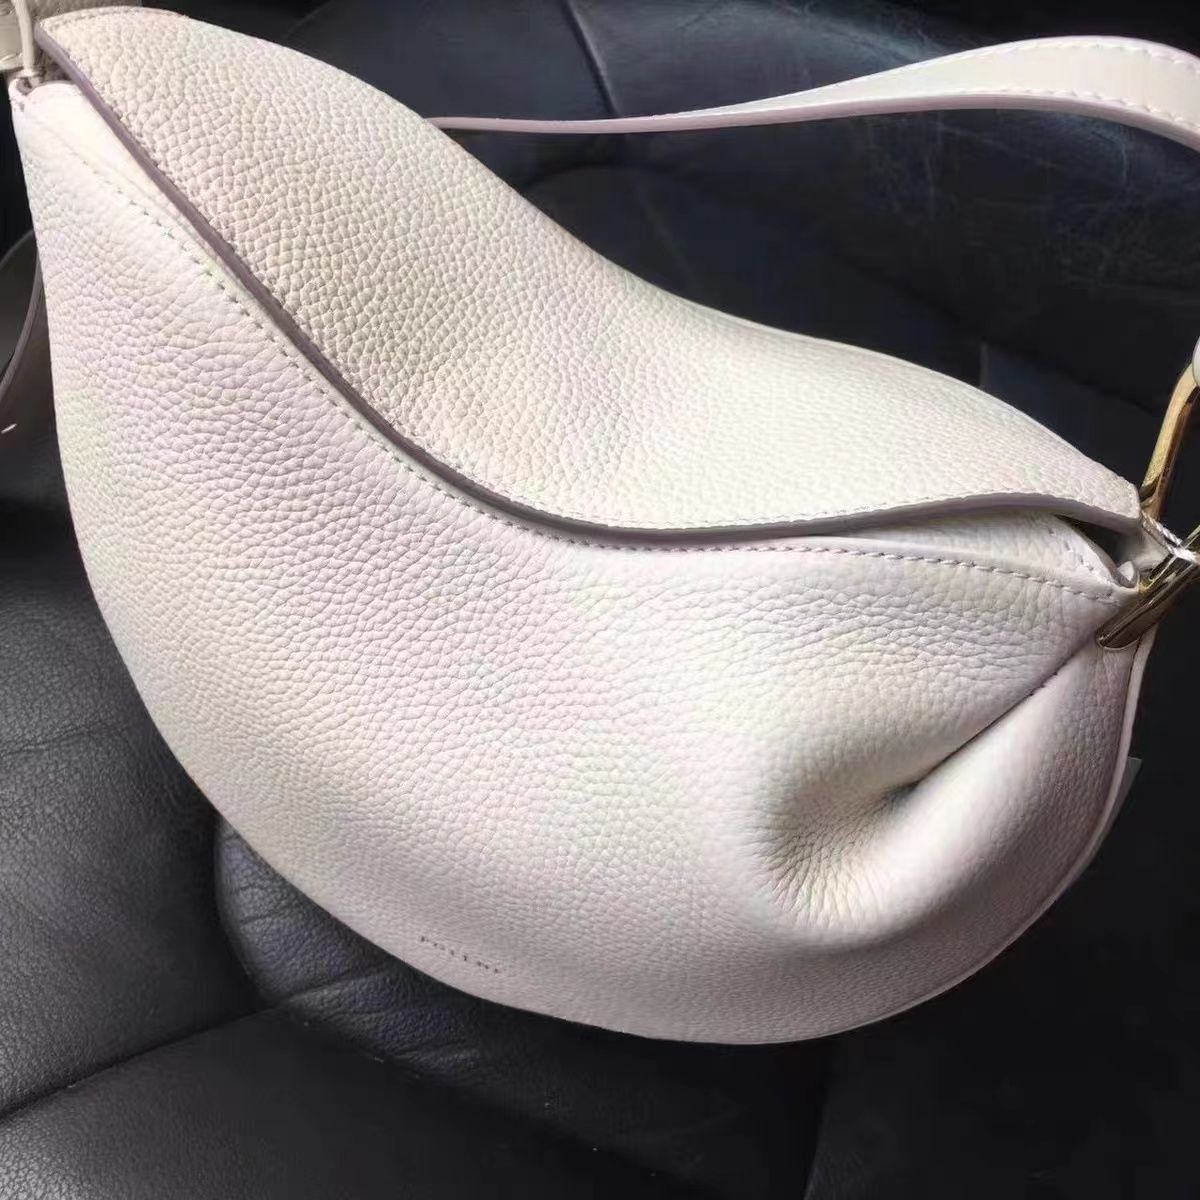 Women's Genuine Leather Lychee pattern Pea Shaped Crossbody Saddle Bag photo review